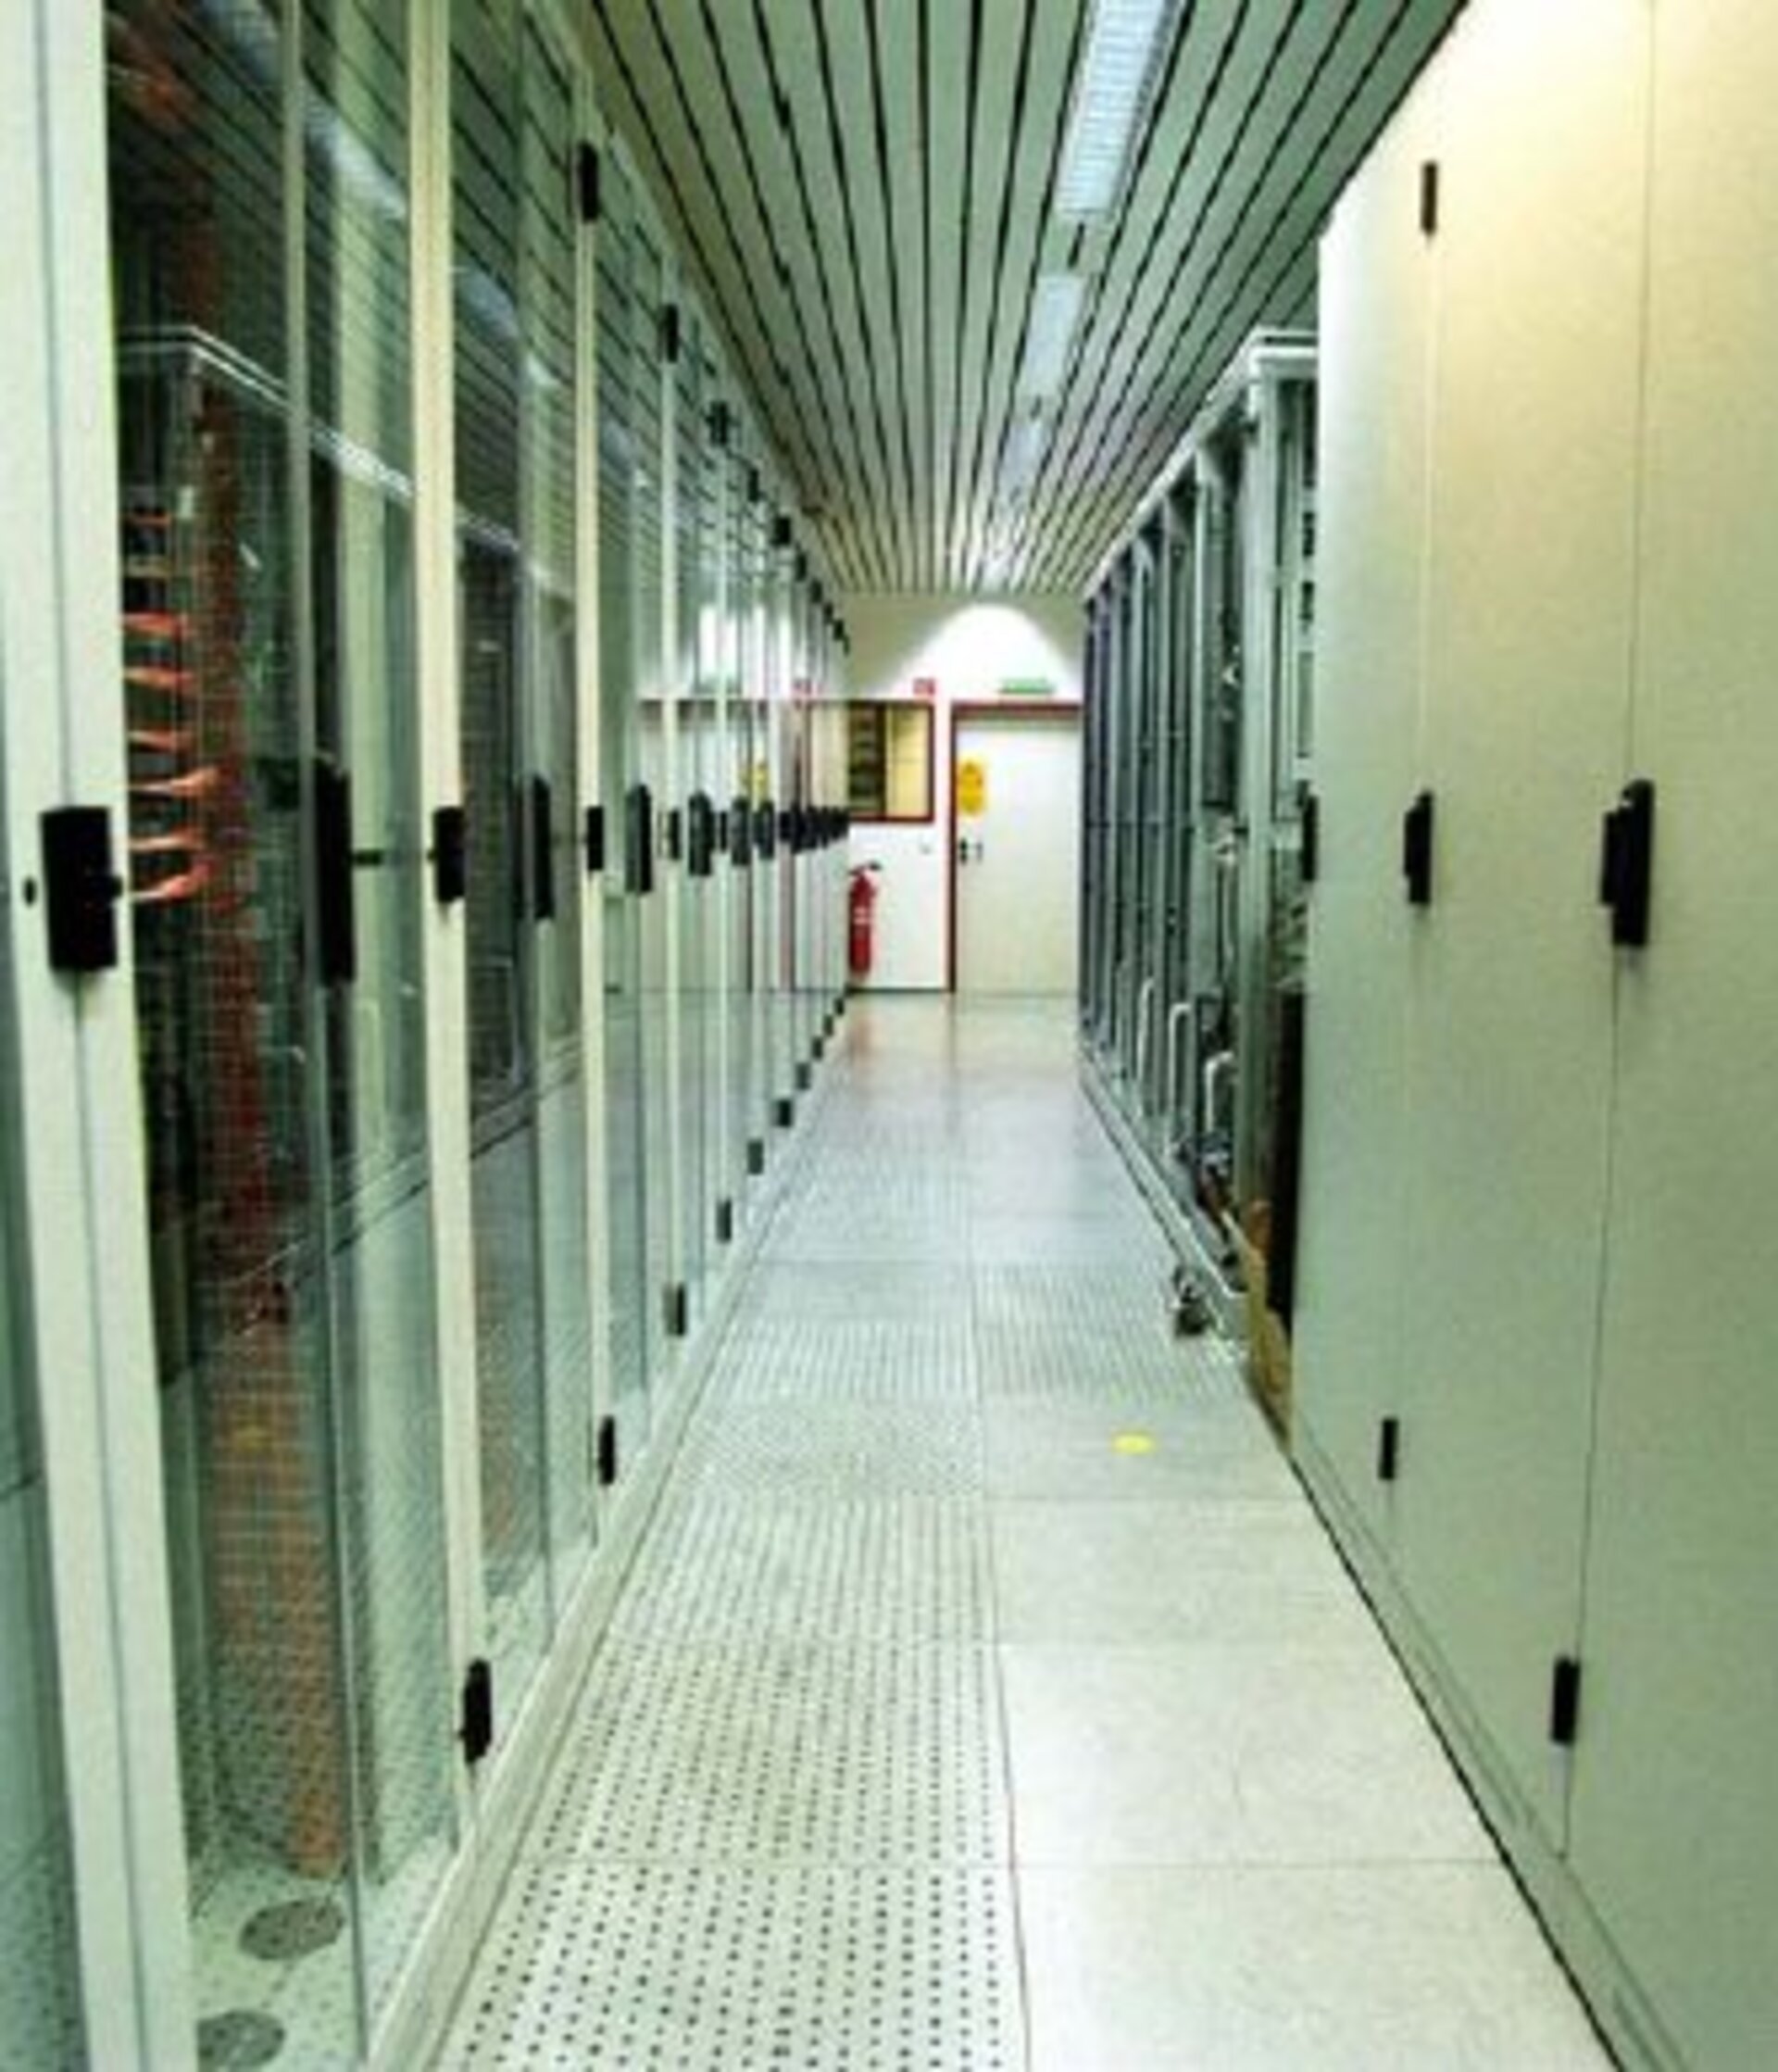 Network Equipment Room at the Columbus Control Centre